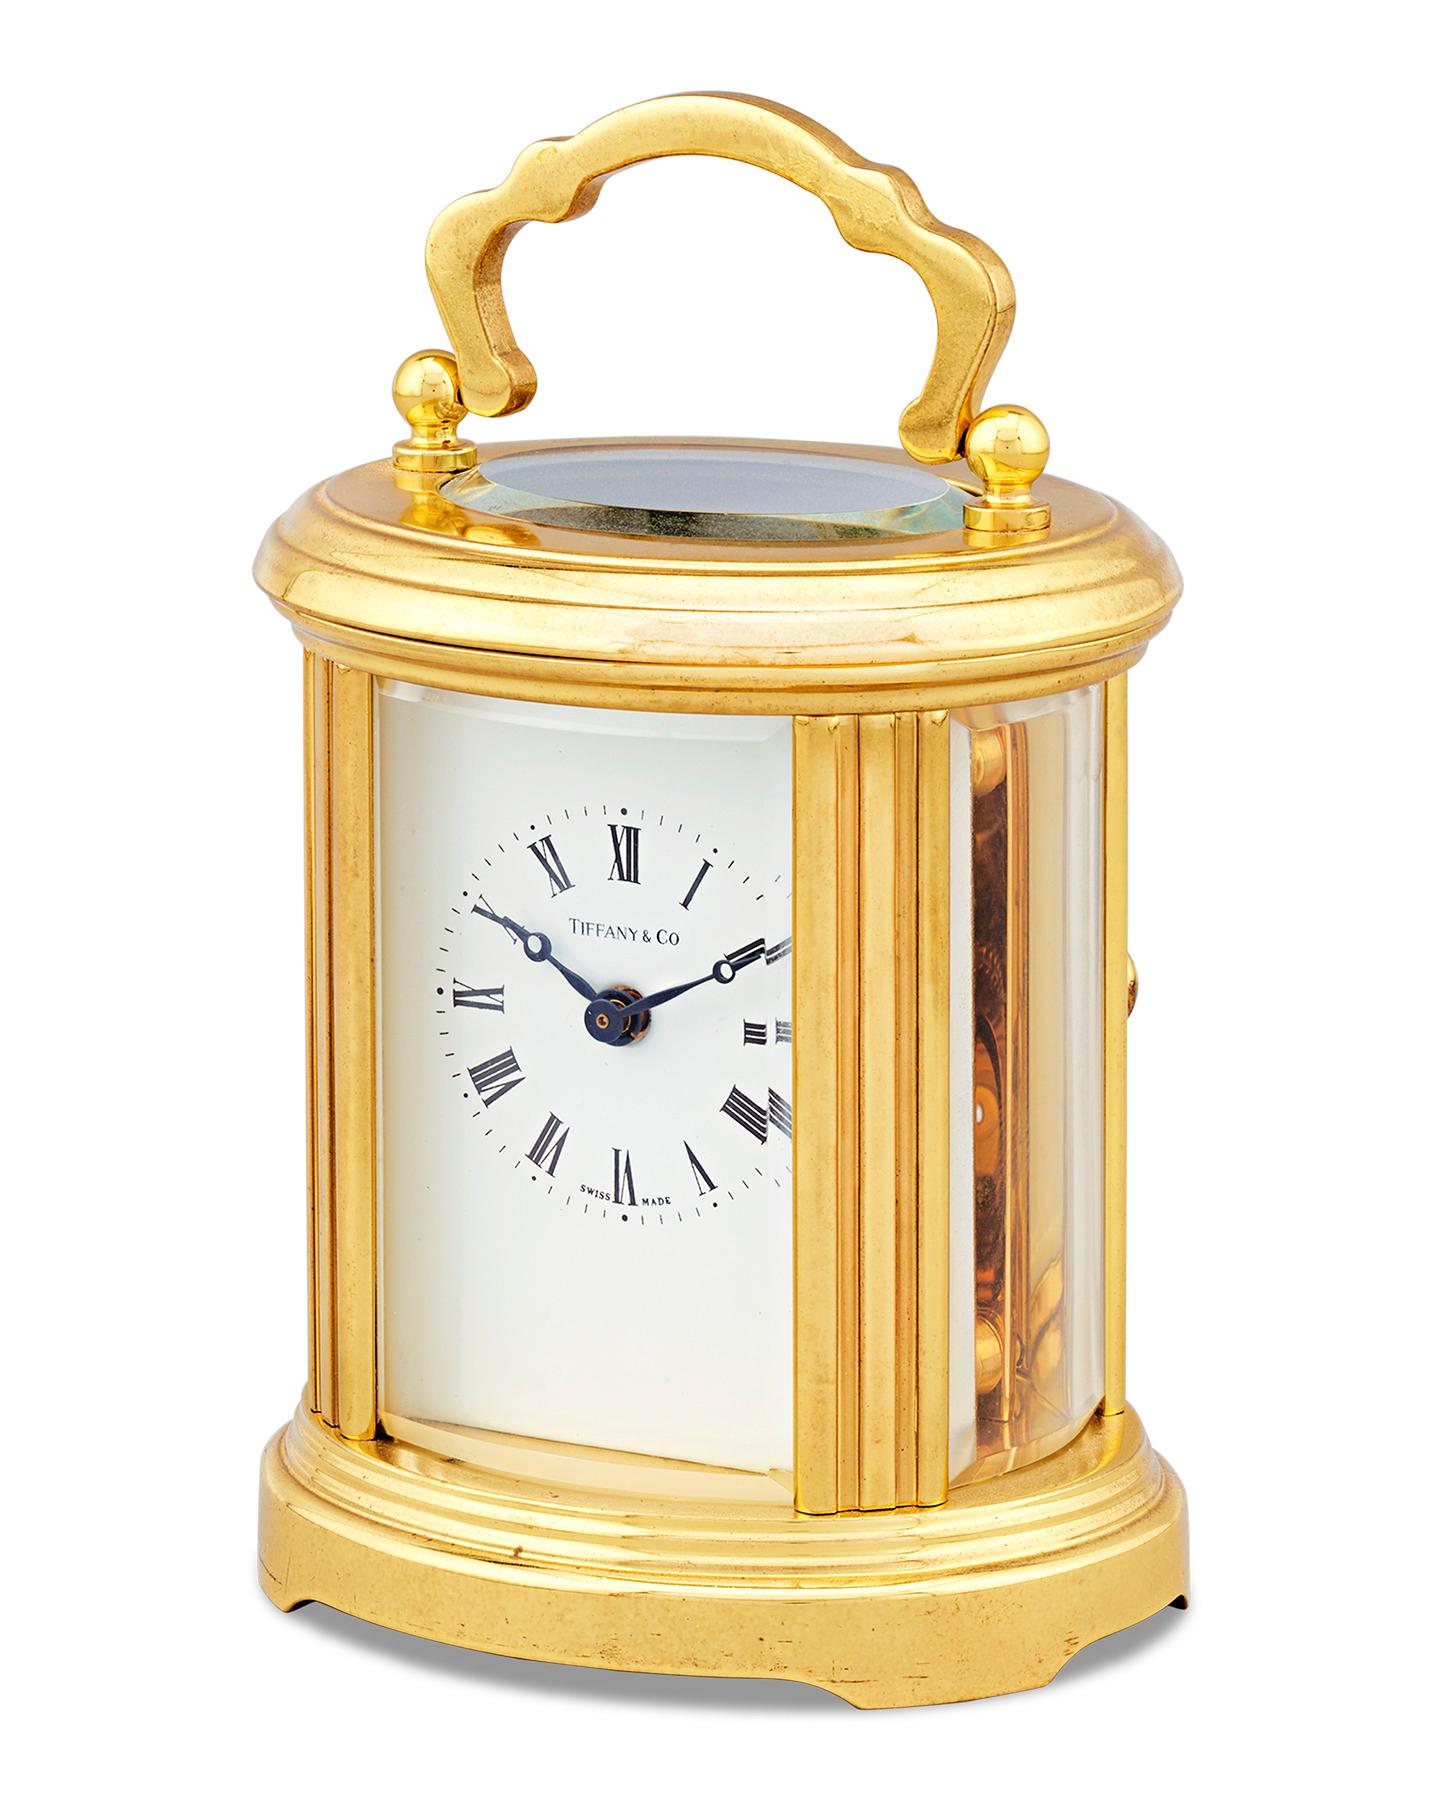 This brass carriage clock epitomizes the timeless luxury of Tiffany & Co. The impressive timepiece is housed in a solid brass frame, complete with a hinged handle for ease of travel. It tells the time on a classic Roman numeral face, while a Swiss